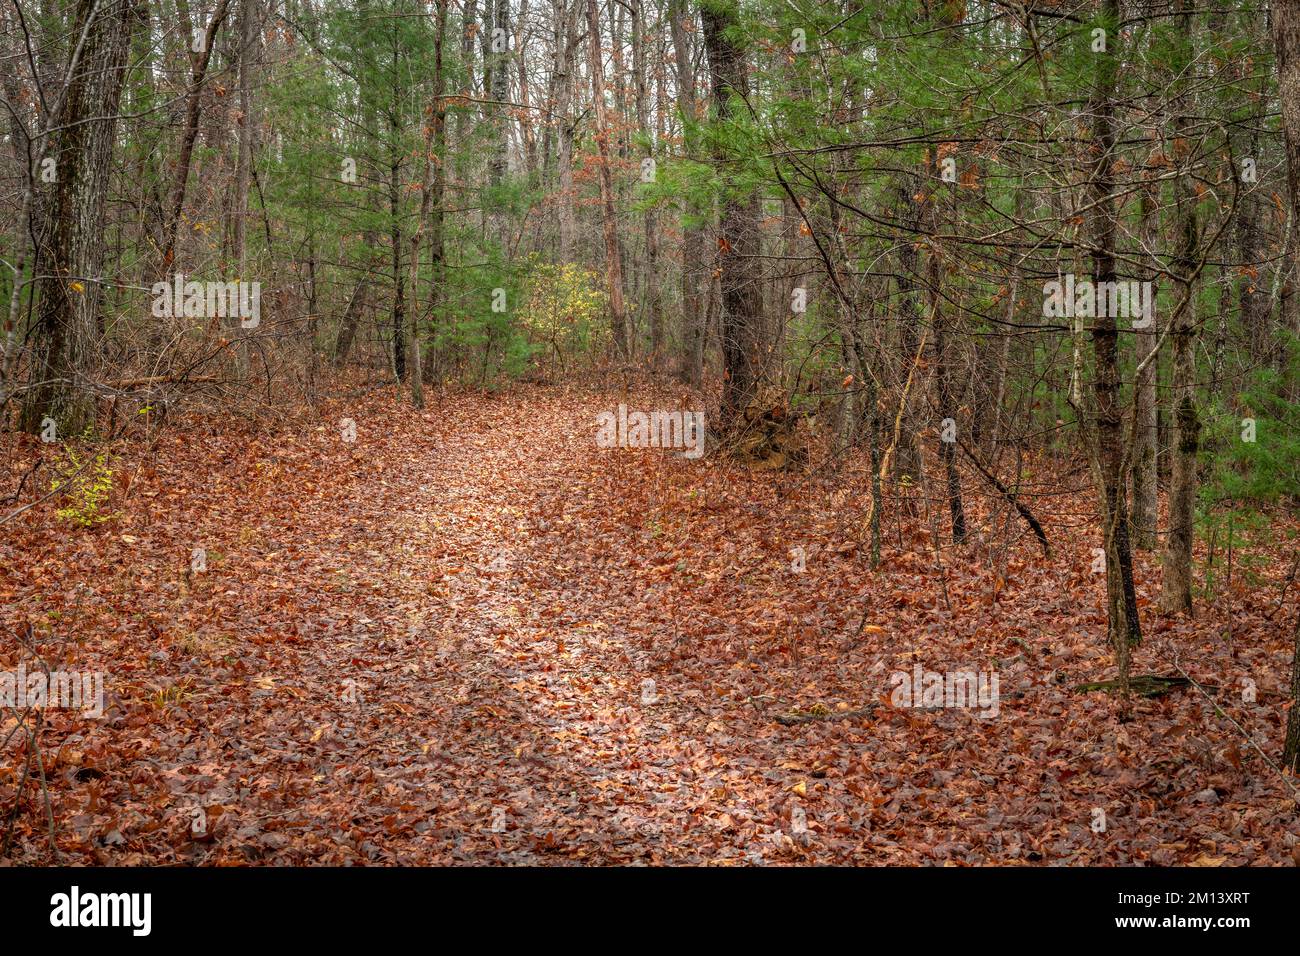 Fall foliage hiking trail in the Cumberland Plateau shows a beautiful walking path through the trees in a peaceful, serene setting. Stock Photo